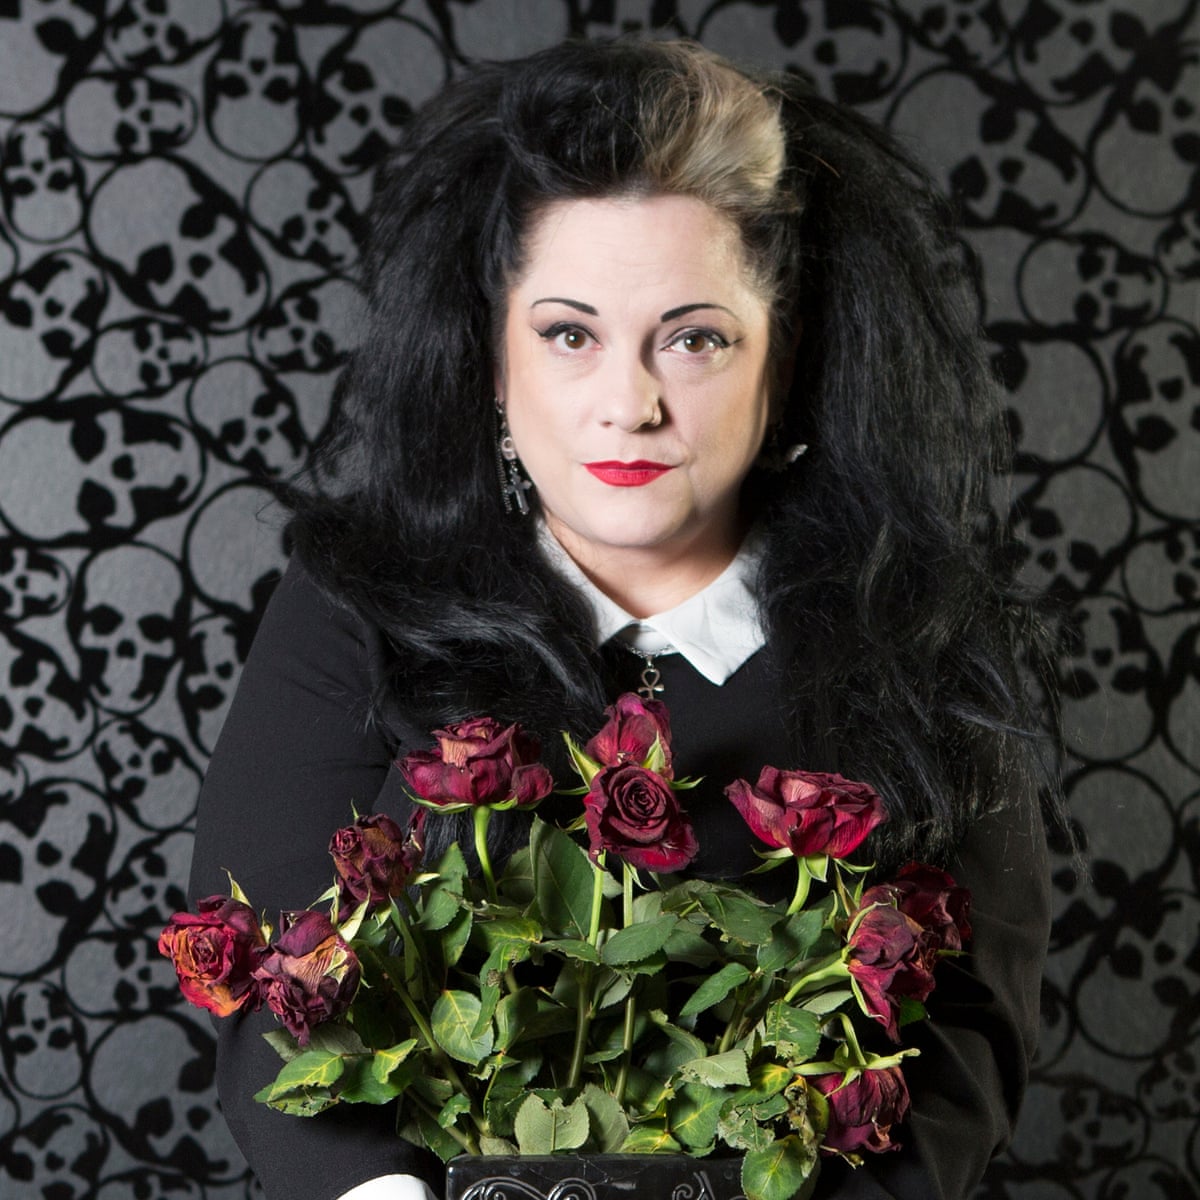 I Haven't Worn Colour Since I Was 14': Meet Britain's Longest Standing Goths. Life And Style